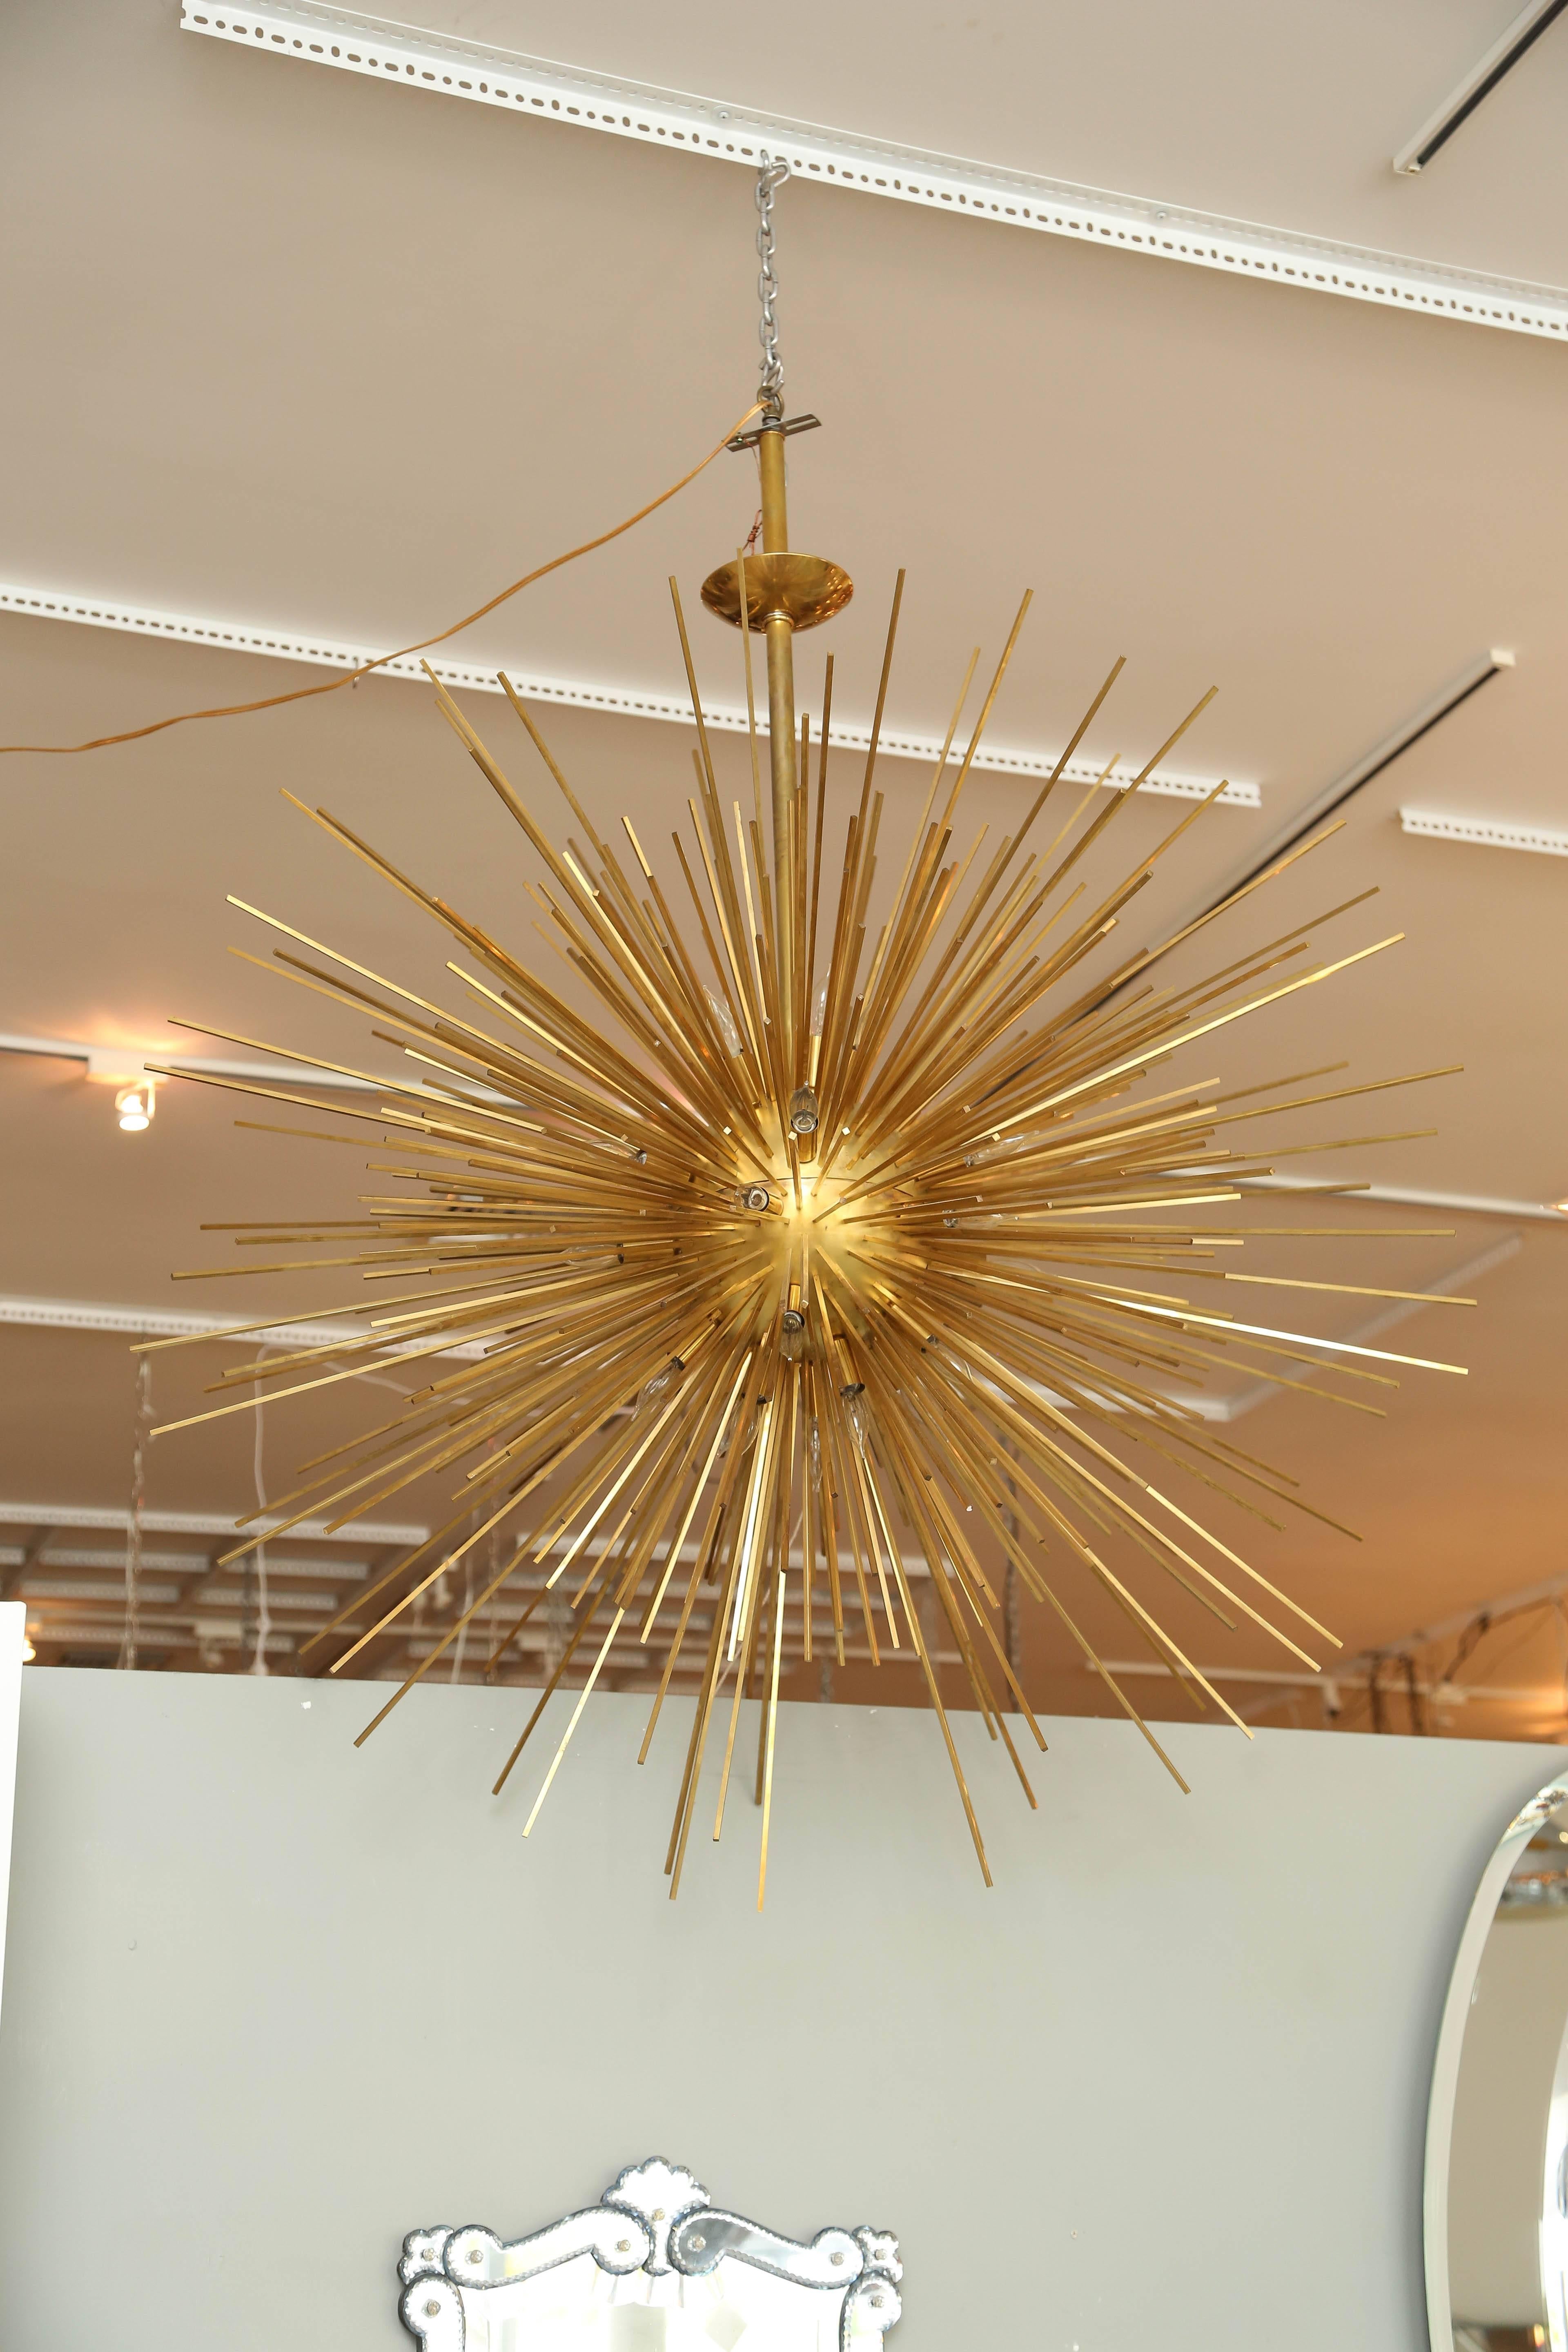 Monumental brass sputnik light fixture with 28 sockets. The design involves a very dense array of spokes of varying lengths. 

